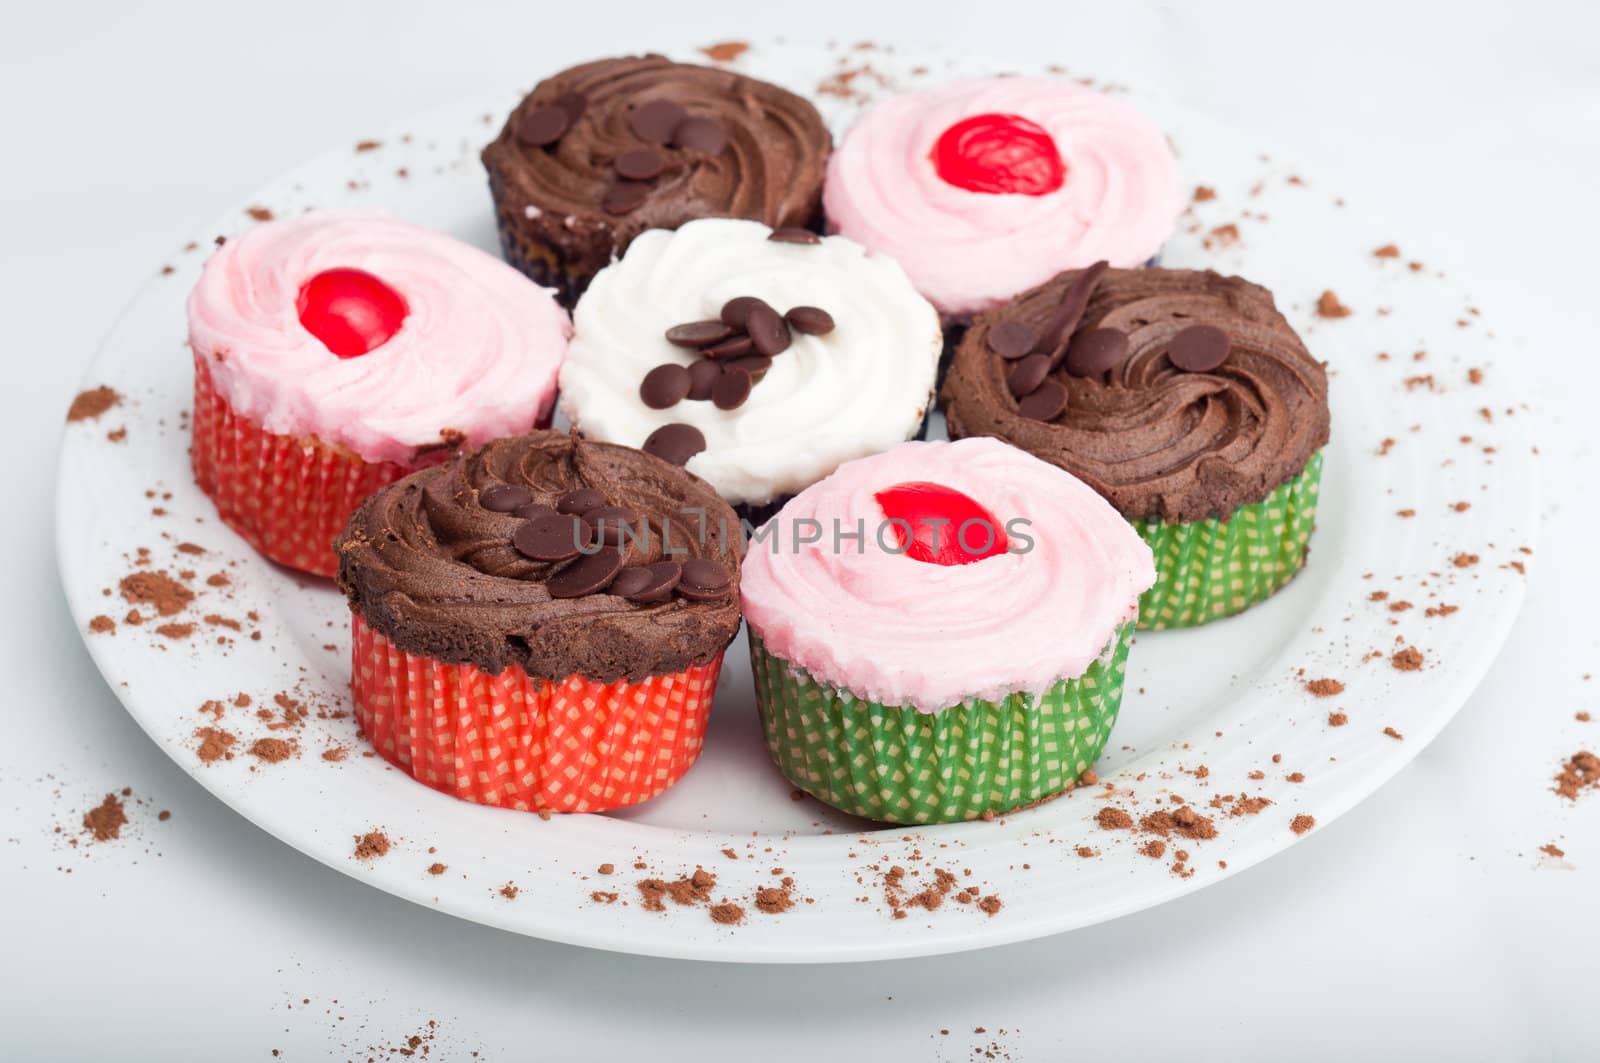 Colorful, delicious cupcakes on a white plate decorated with cinnamon sprinkles